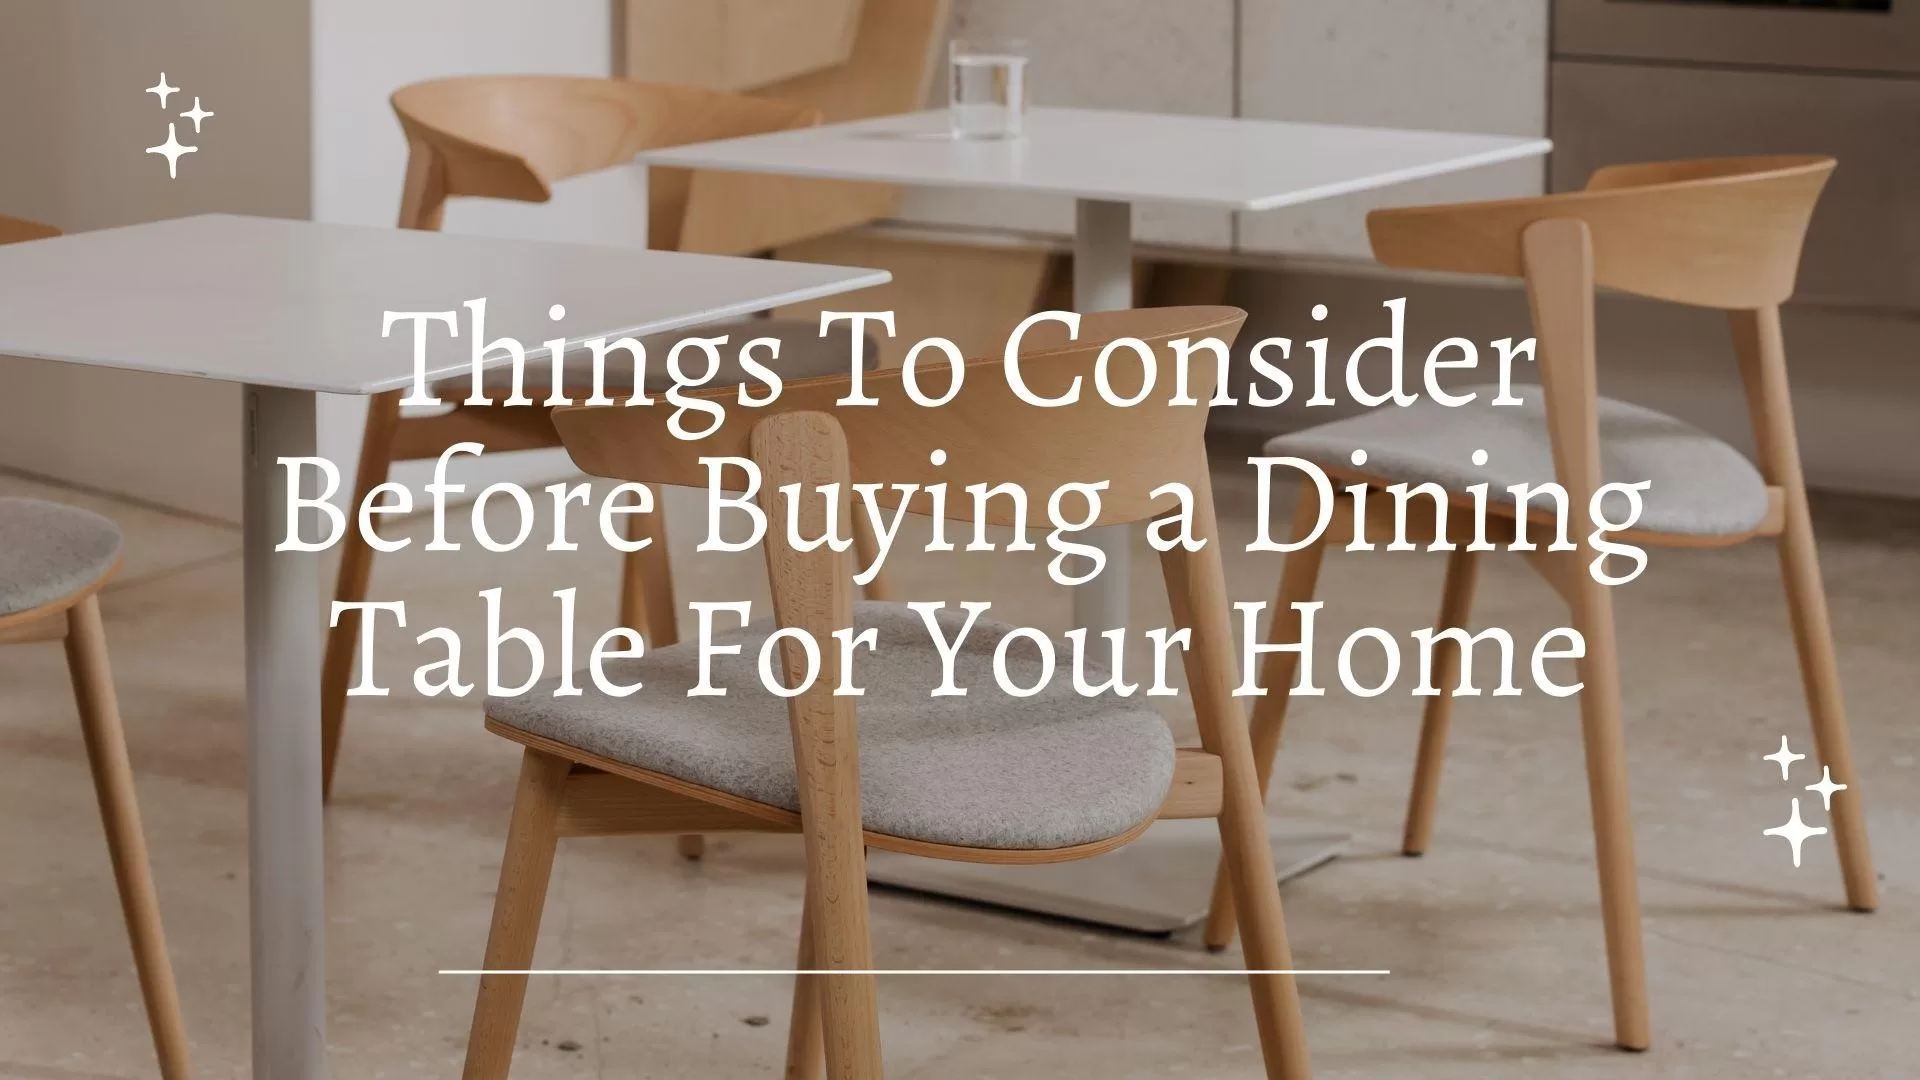 image - Things To Consider Before Buying a Dining Table for Your Home